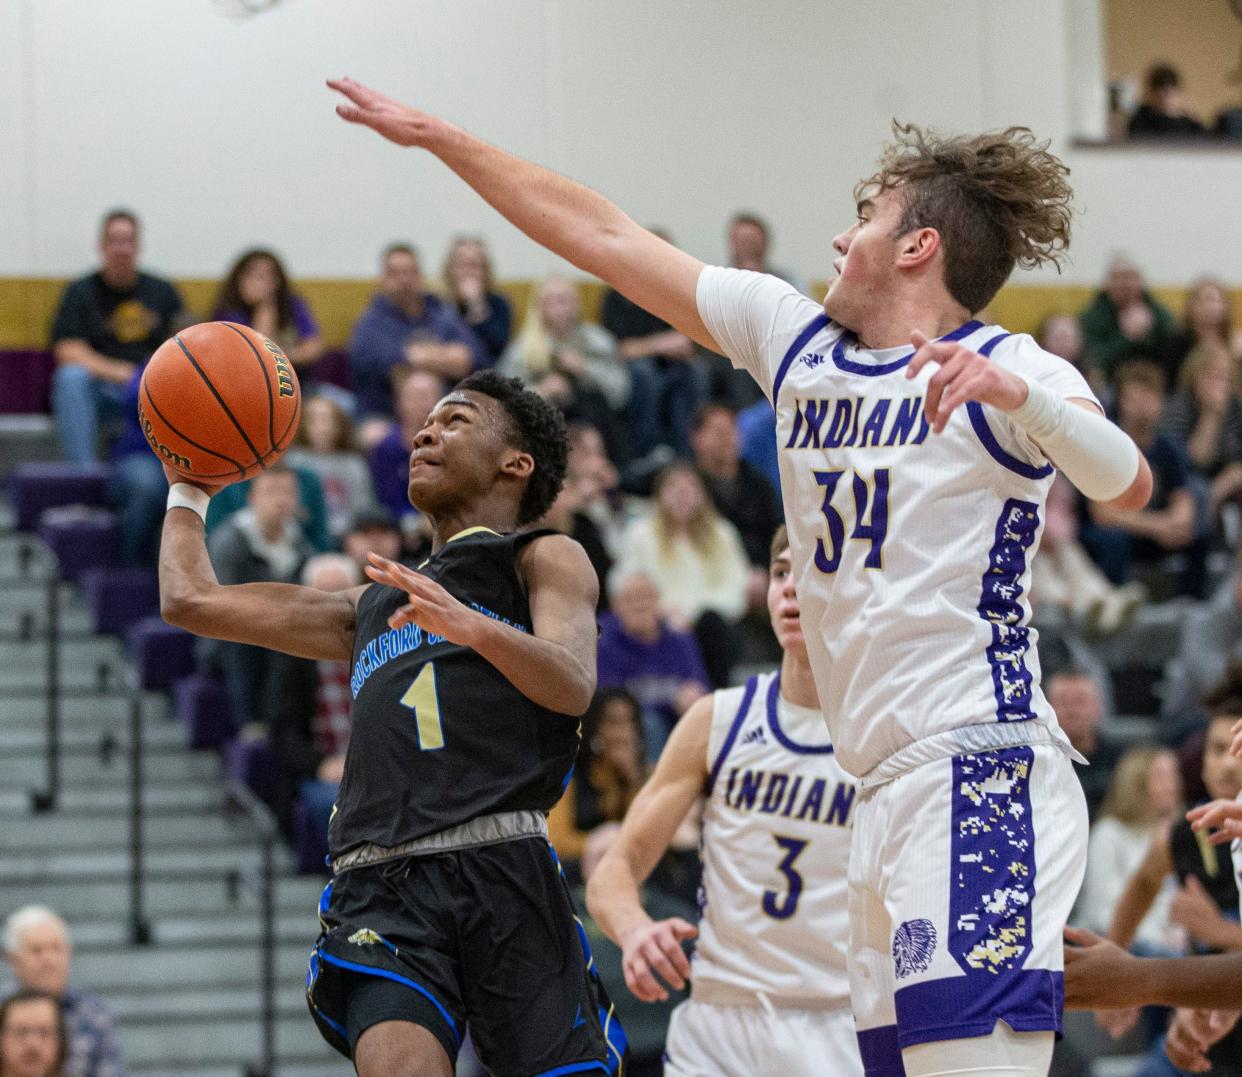 Rockford Christian senior Kevion Cummings (1) shoots around Pecatonica's Korbin Gann (34) in a battle of two state-ranked teams Jan. 9, 2023 at Pecatonica. The two will be teammates April 15 in the Rising Stars Classic, as the area all-stars try to improve to 7-5 against the NIC-10 in the last 12 games.